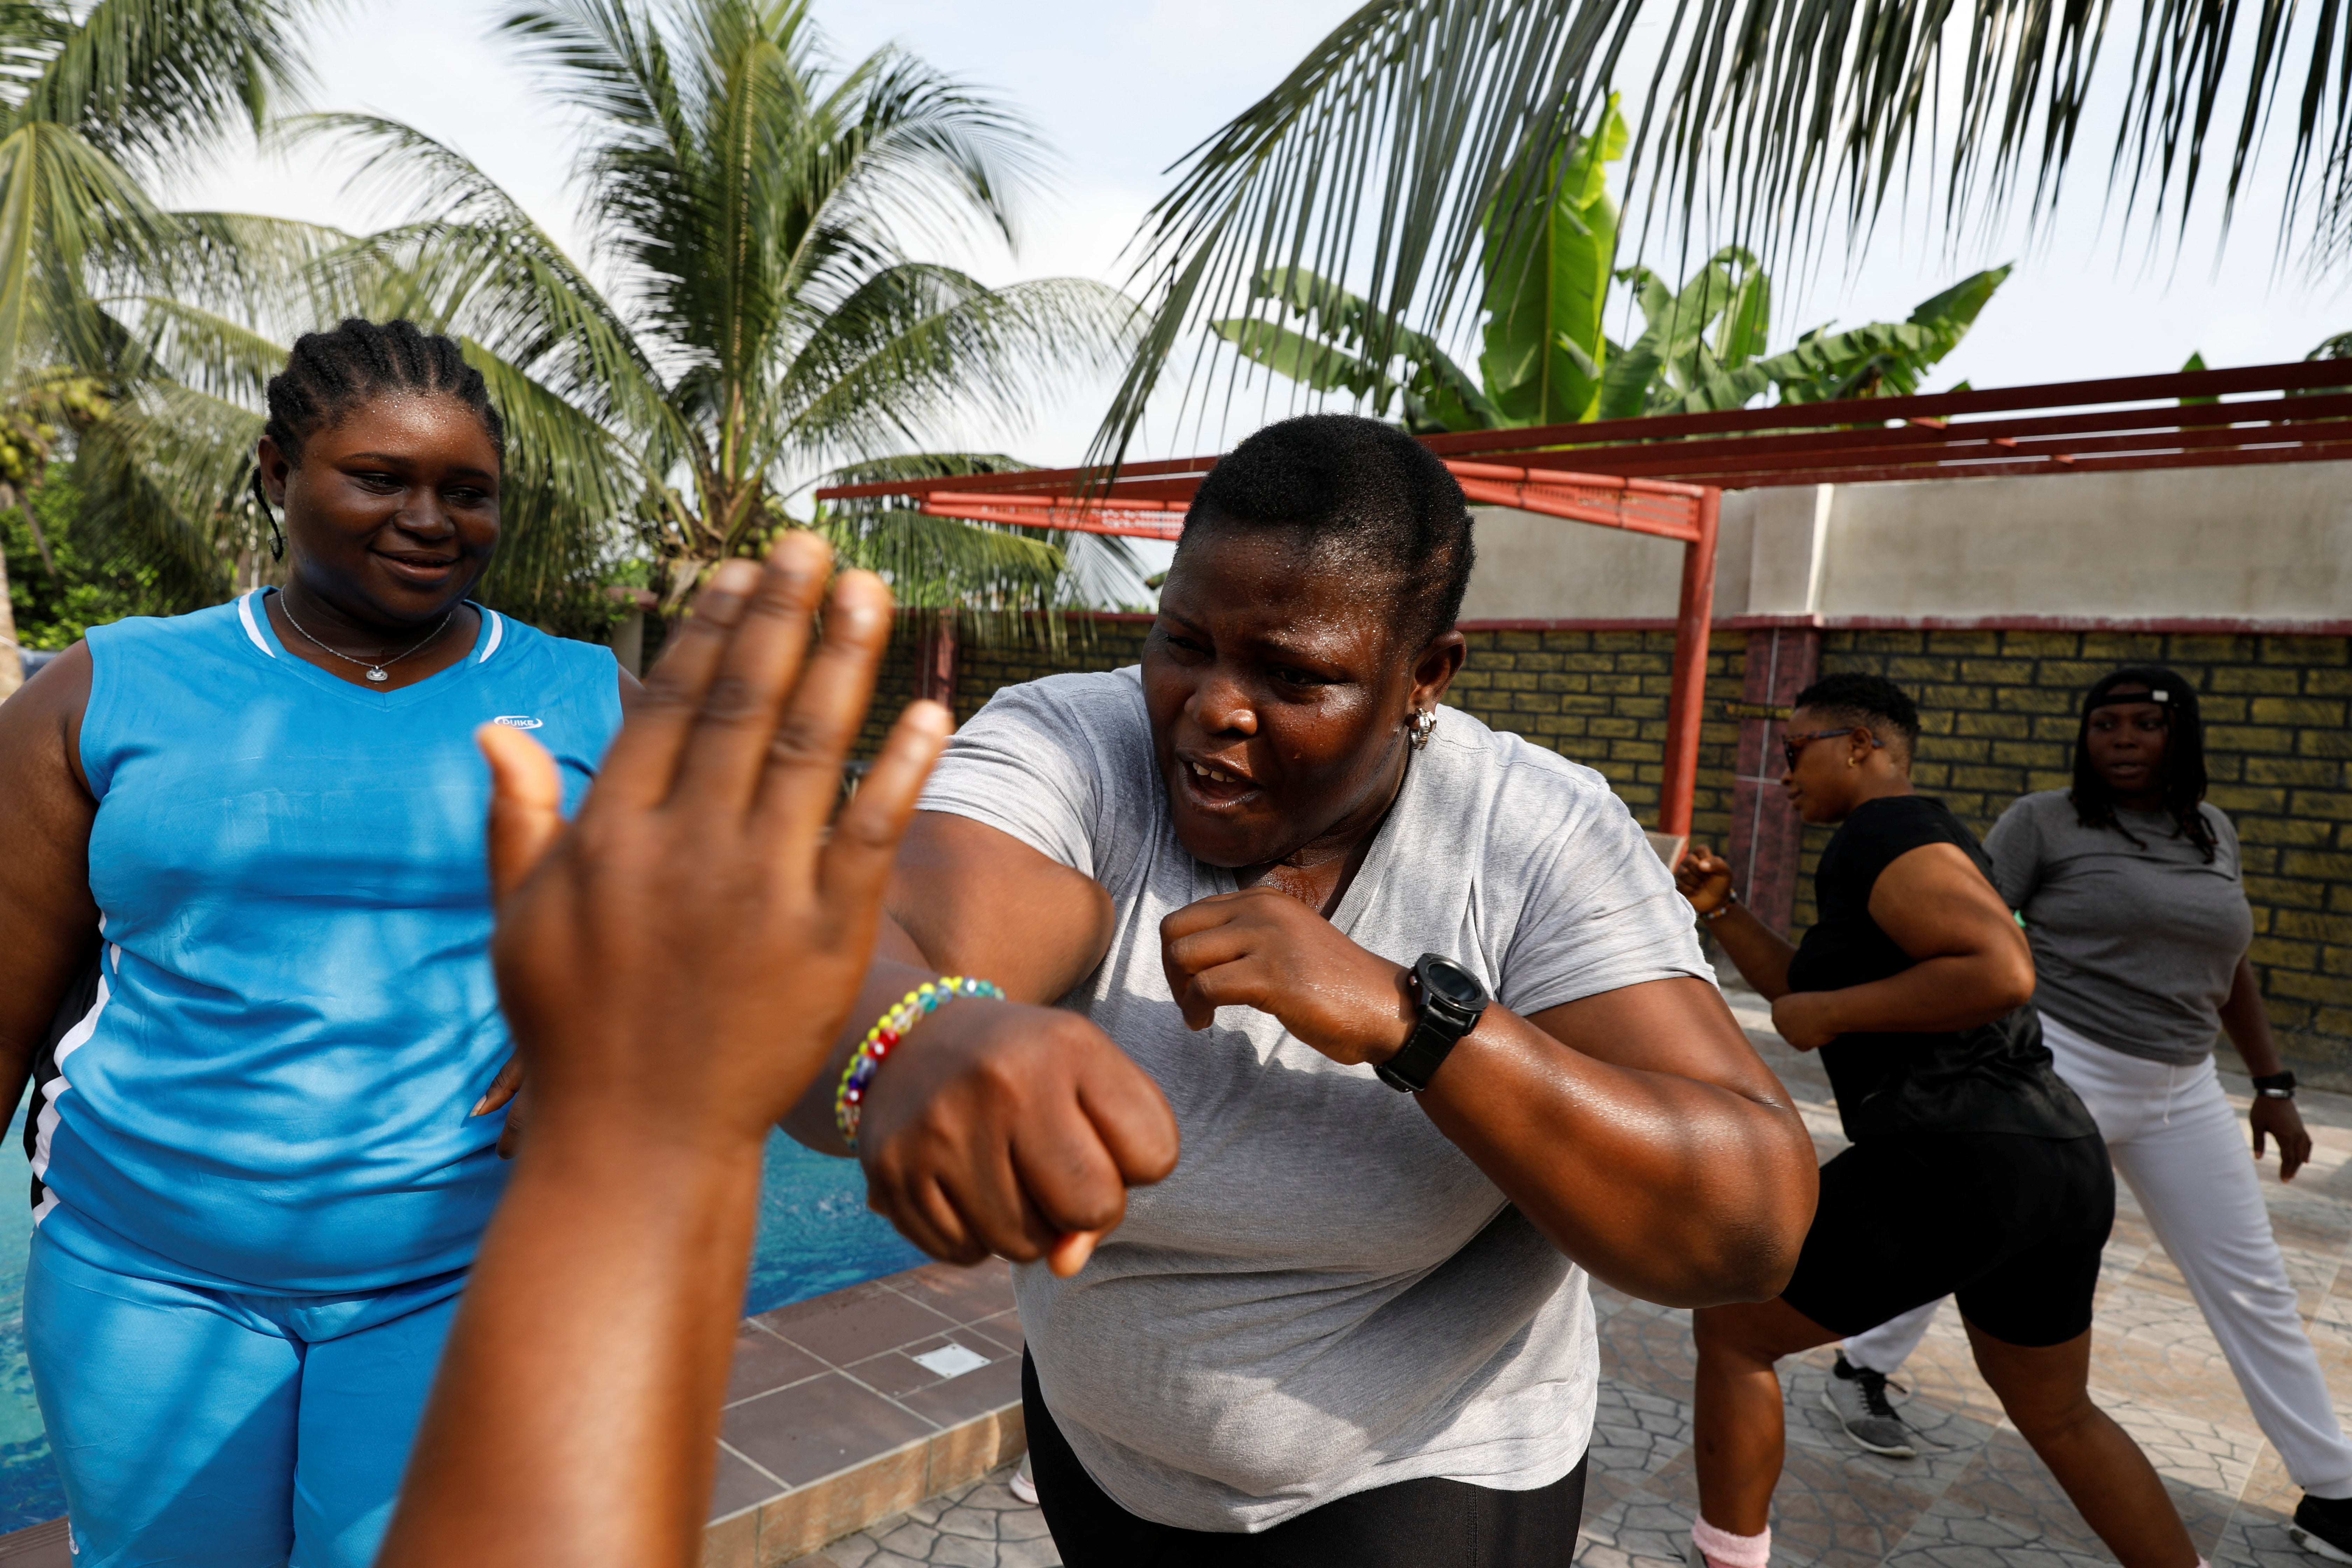 Nsikan Ekandem, Tolulope Ukpanah, Margaret Thomas and Samantha Joseph train during an exercise session at Camp Gee Hotel in Uyo